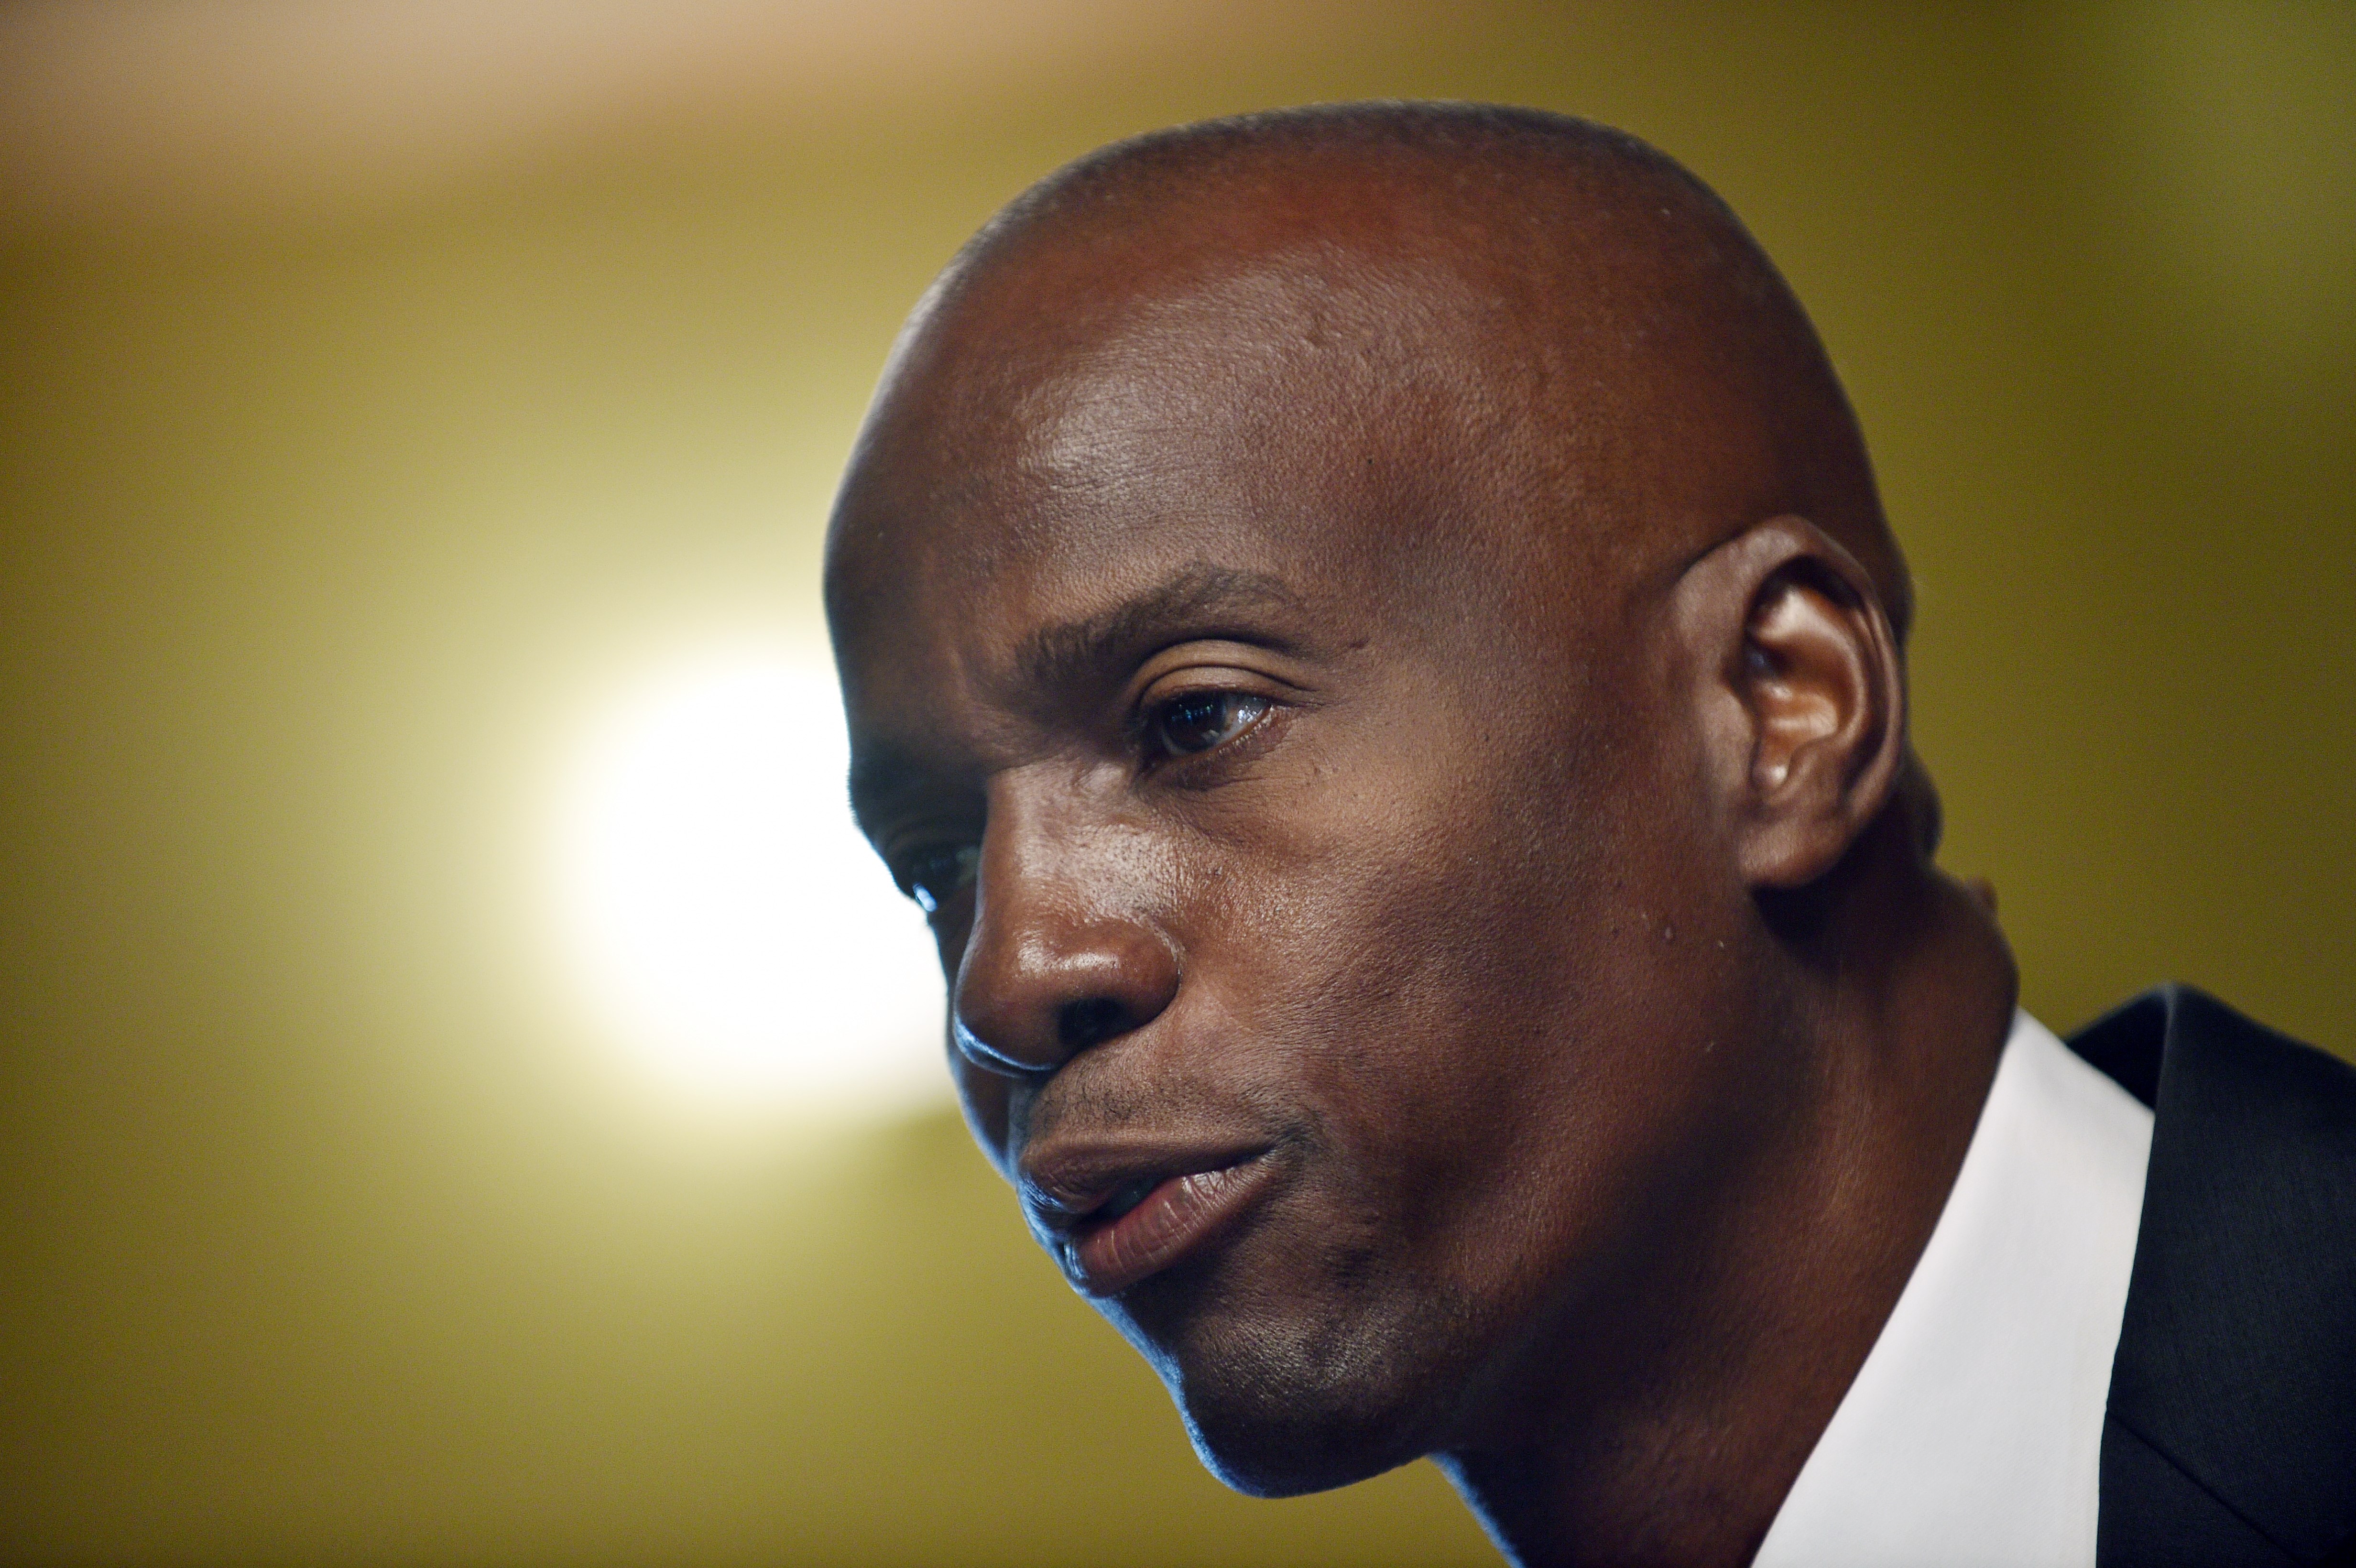 In this October 22, 2015 file photo, Jovenel Moise speaks during a press conference in Port-au-Prince.